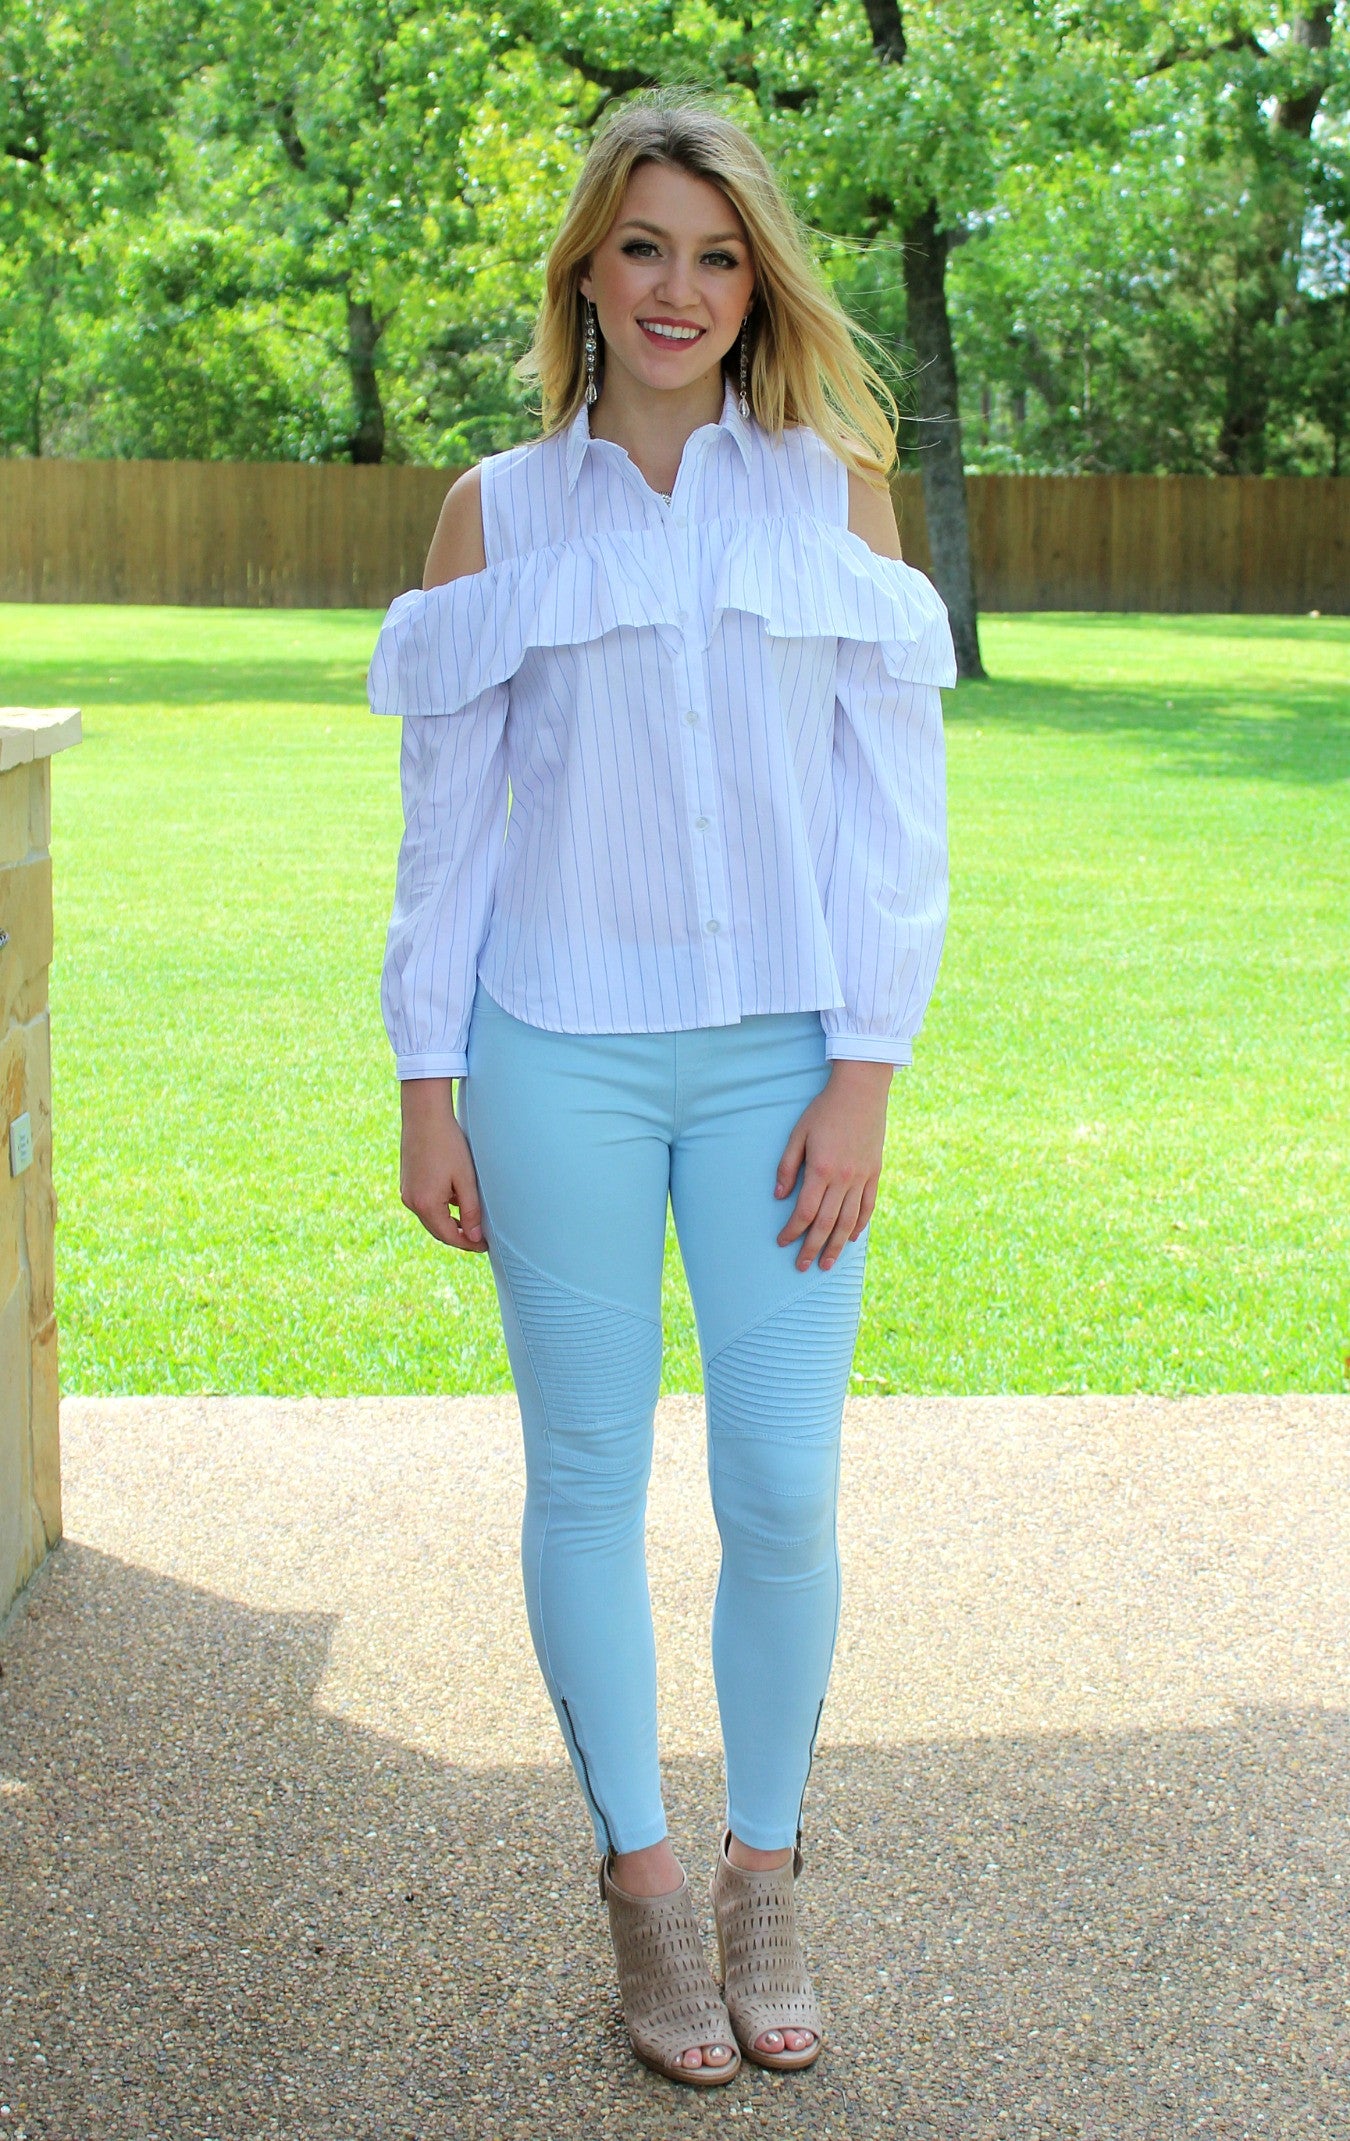 Chic Chick Stripe Open Shoulder Ruffle Top in White - Giddy Up Glamour Boutique